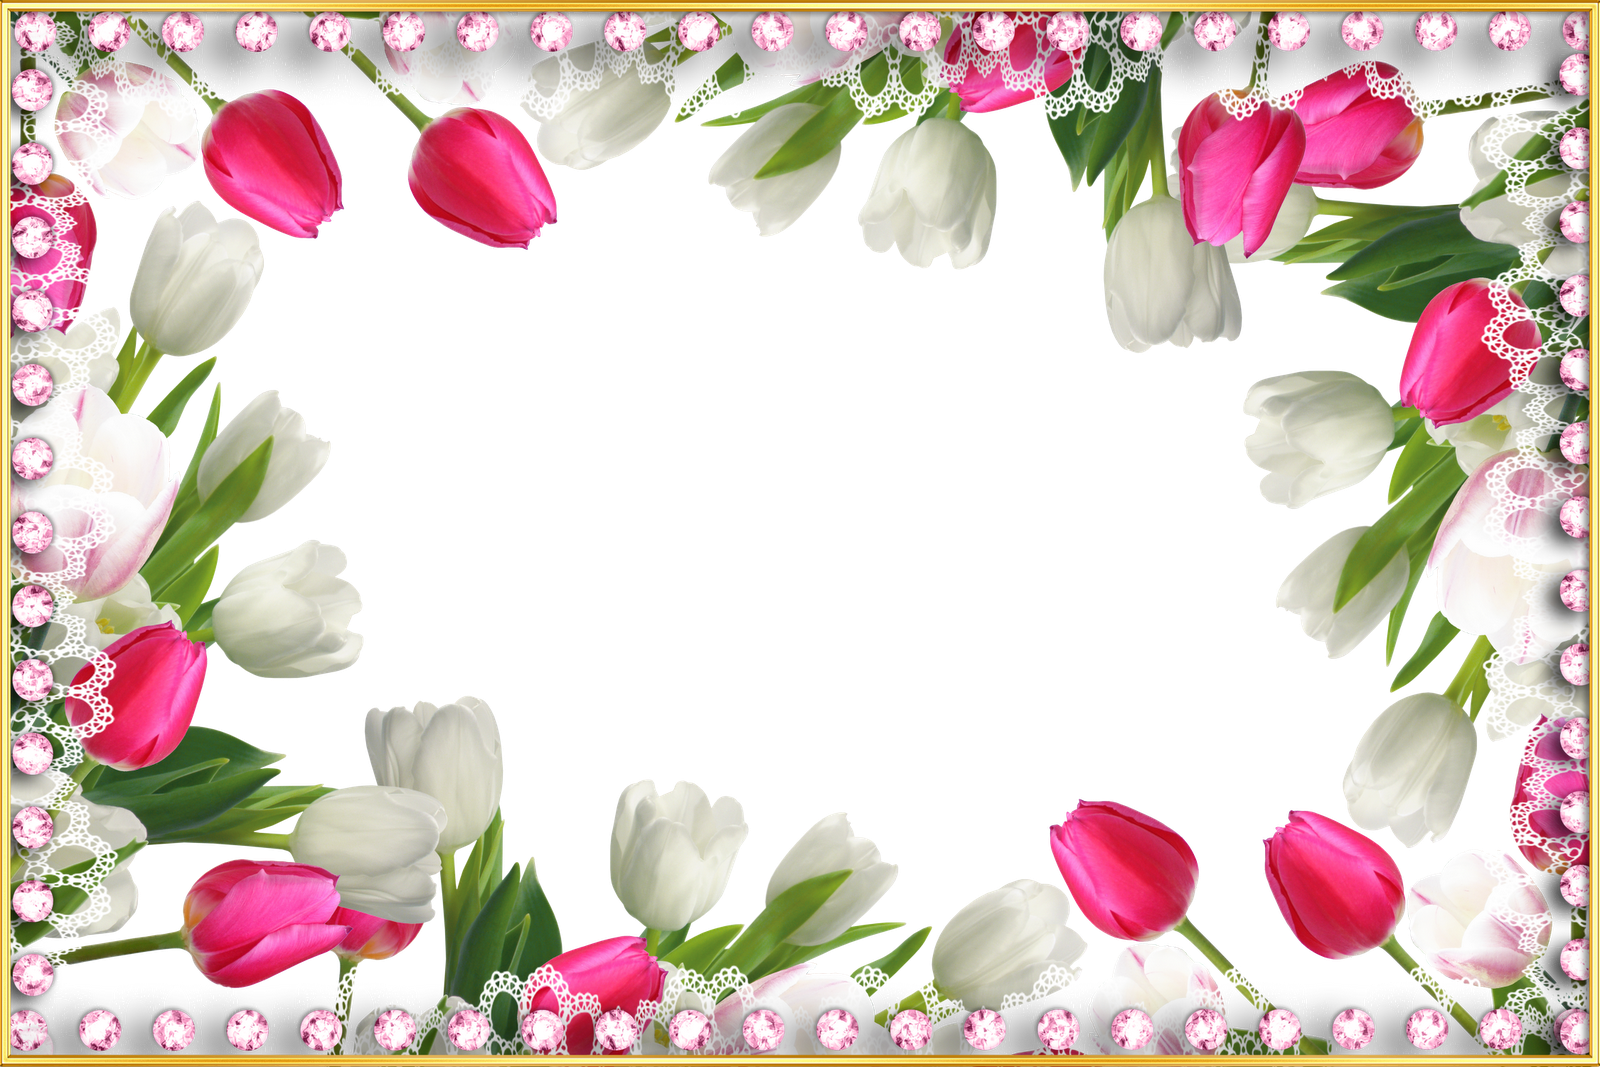 Seven - Beautiful Transparent Frame With Tulips (1600x1067)